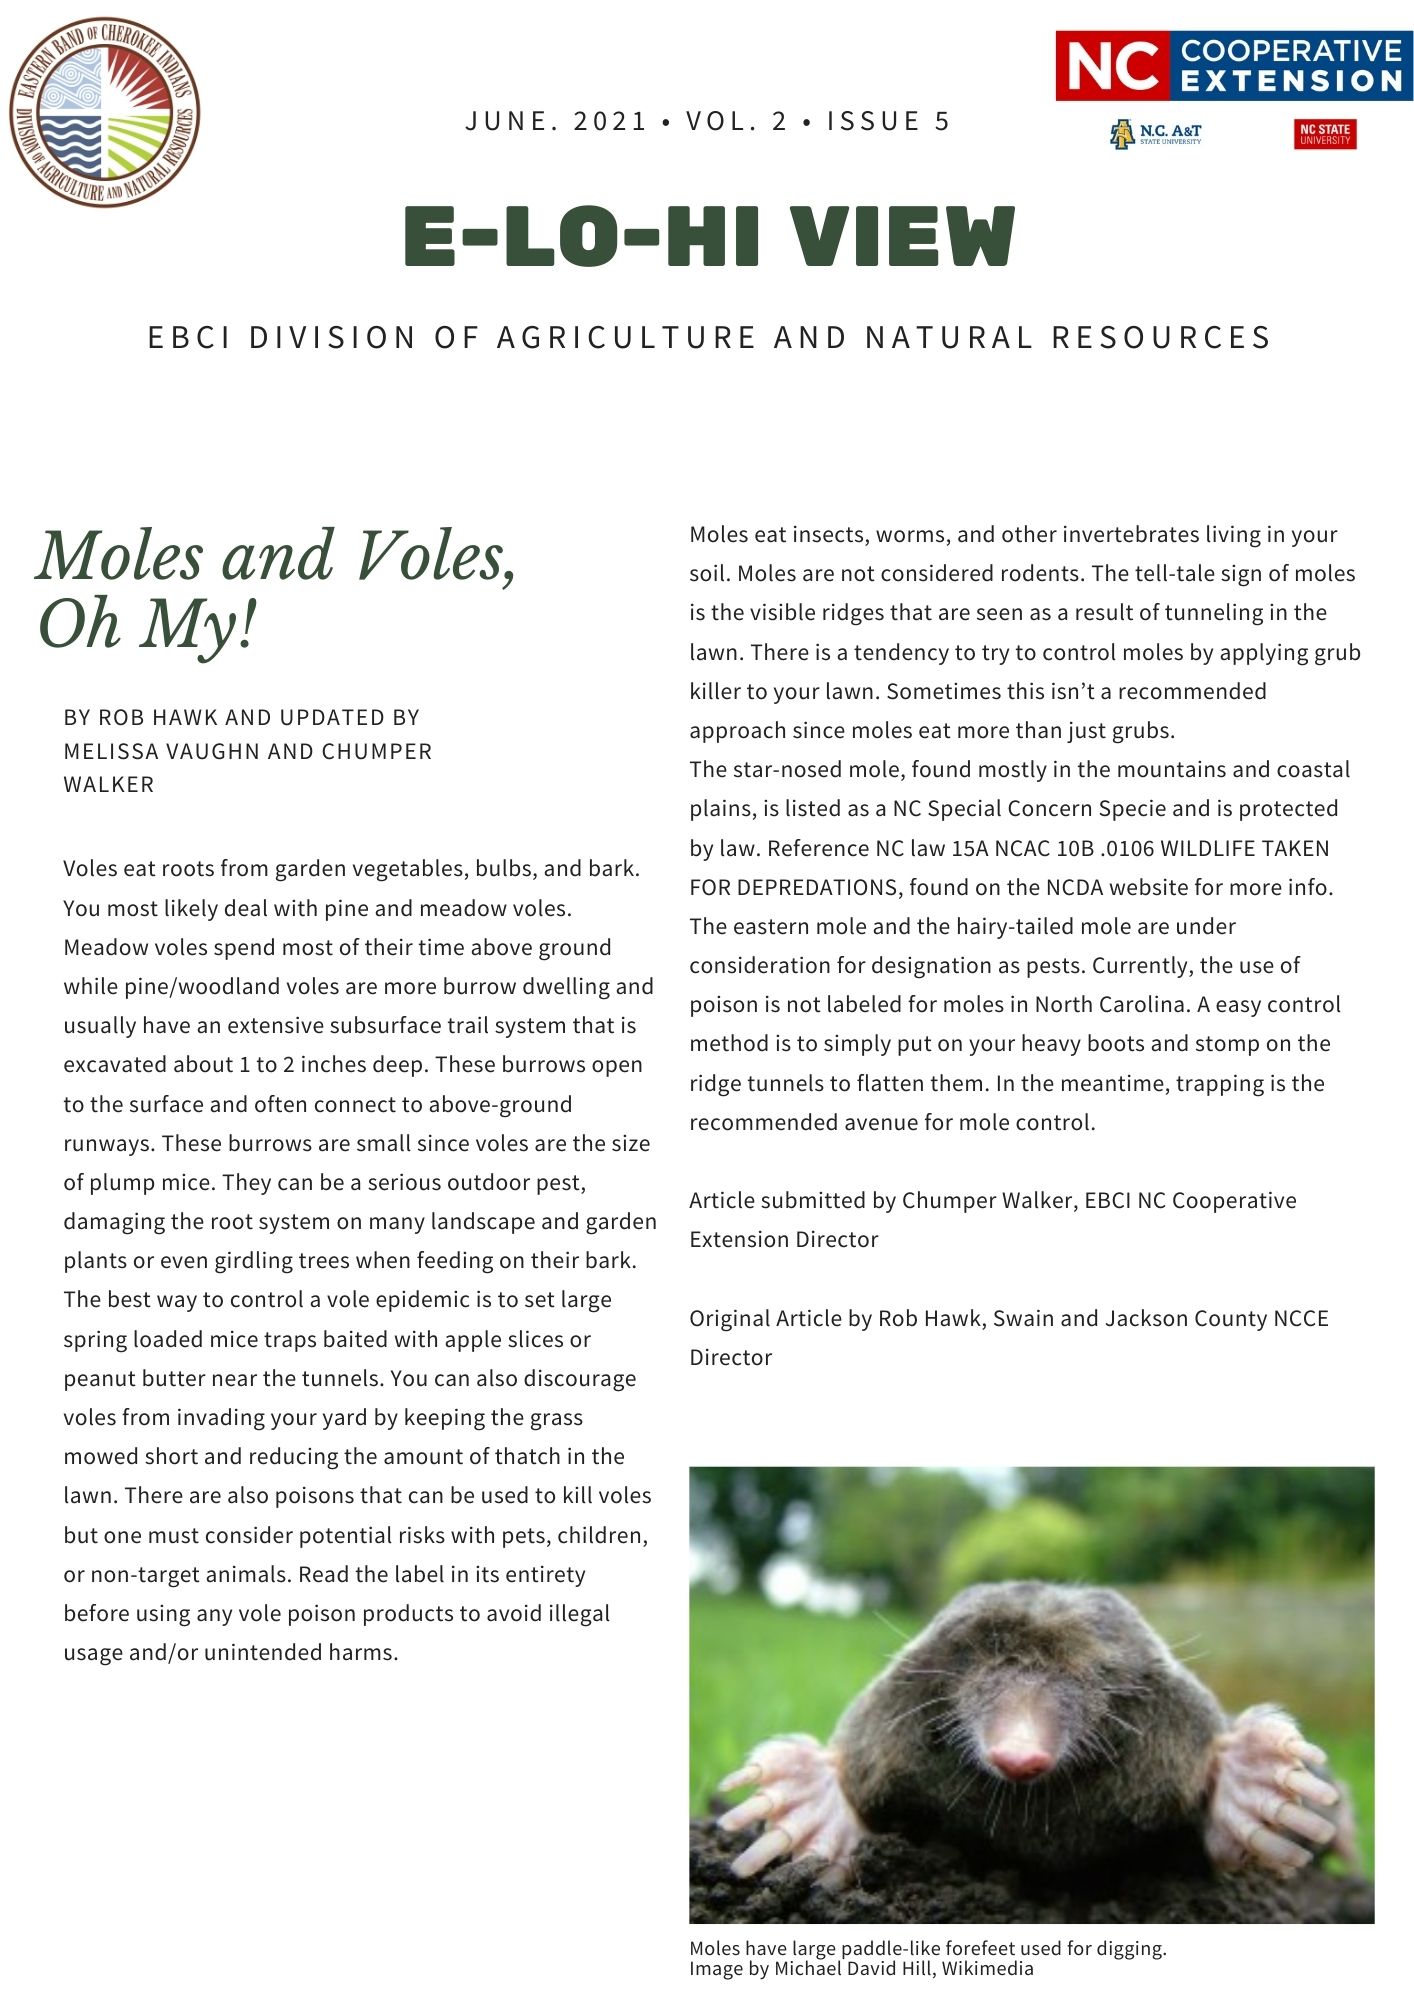 Moles and Voles, Oh My! — Written By Rob Hawk and updated by Melissa Vaughn and Chumper Walker   Woodland or Pine Vole   rodent   Voles eat roots from garden vegetables, bulbs, and bark. You most likely deal with pine and meadow voles. Meadow voles spend most of their time above ground while pine/woodland voles are more burrow dwelling and usually have an extensive subsurface trail system that is excavated about 1 to 2 inches deep. These burrows open to the surface and often connect to above-ground runways. These burrows are small since voles are the size of plump mice. They can be a serious outdoor pest, damaging the root system on many landscape and garden plants or even girdling trees when feeding on their bark. The best way to control a vole epidemic is to set large spring loaded mice traps baited with apple slices or peanut butter near the tunnels. You can also discourage voles from invading your yard by keeping the grass mowed short and reducing the amount of thatch in the lawn. There are also poisons that can be used to kill voles but one must consider potential risks with pets, children, or non-target animals. Read the label in its entirety before using any vole poison products to avoid illegal usage and/or unintended harms. Mole   Moles have large paddle-like forefeet used for digging. Image by Michael David Hill, Wikimedia   Moles eat insects, worms, and other invertebrates living in your soil. Moles are not considered rodents. The tell-tale sign of moles is the visible ridges that are seen as a result of tunneling in the lawn. There is a tendency to try to control moles by applying grub killer to your lawn. Sometimes this isn’t a recommended approach since moles eat more than just grubs. The star-nosed mole, found mostly in the mountains and coastal plains, is listed as a NC Special Concern Specie and is protected by law. Reference NC law 15A NCAC 10B .0106 WILDLIFE TAKEN FOR DEPREDATIONS, found on the NCDA website for more info. The eastern mole and the hairy-tailed mole are under consideration for designation as pests. Currently, the use of poison is not labeled for moles in North Carolina. A easy control method is to simply put on your heavy boots and stomp on the ridge tunnels to flatten them. In the meantime, trapping is the recommended avenue for mole control. Article submitted by Chumper Walker, EBCI N.C. Cooperative Extension Director   Original Article by Rob Hawk, Swain and Jackson County NCCE Director    